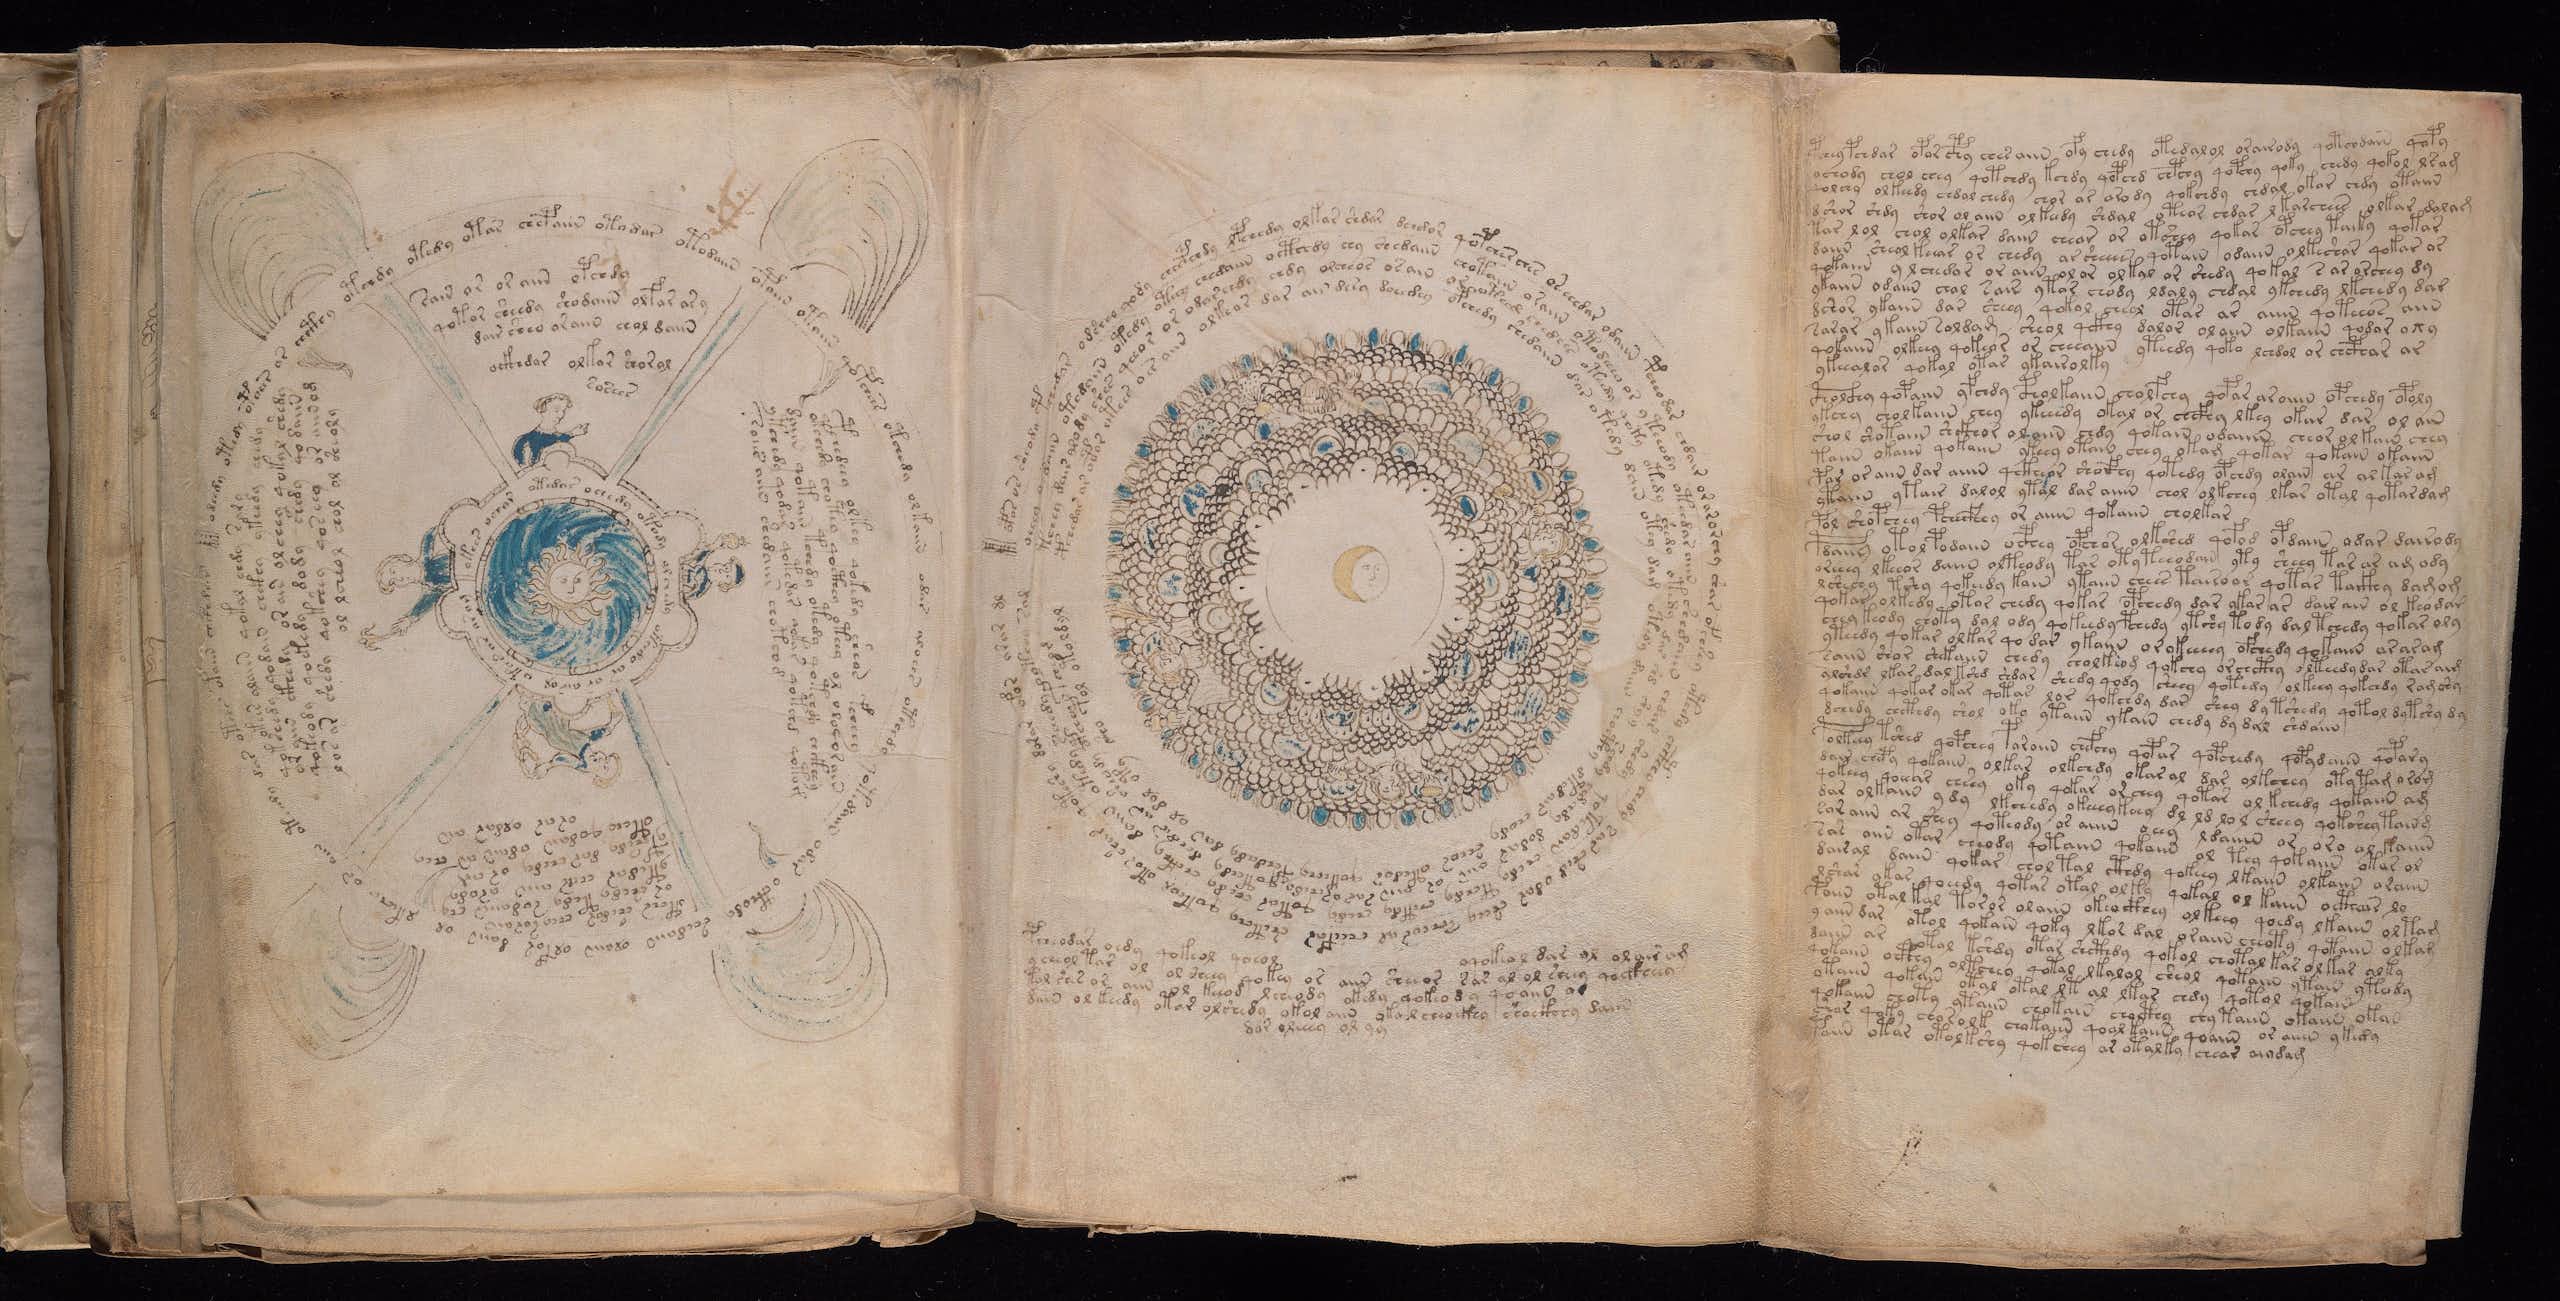 Pages from the Voynich manuscript